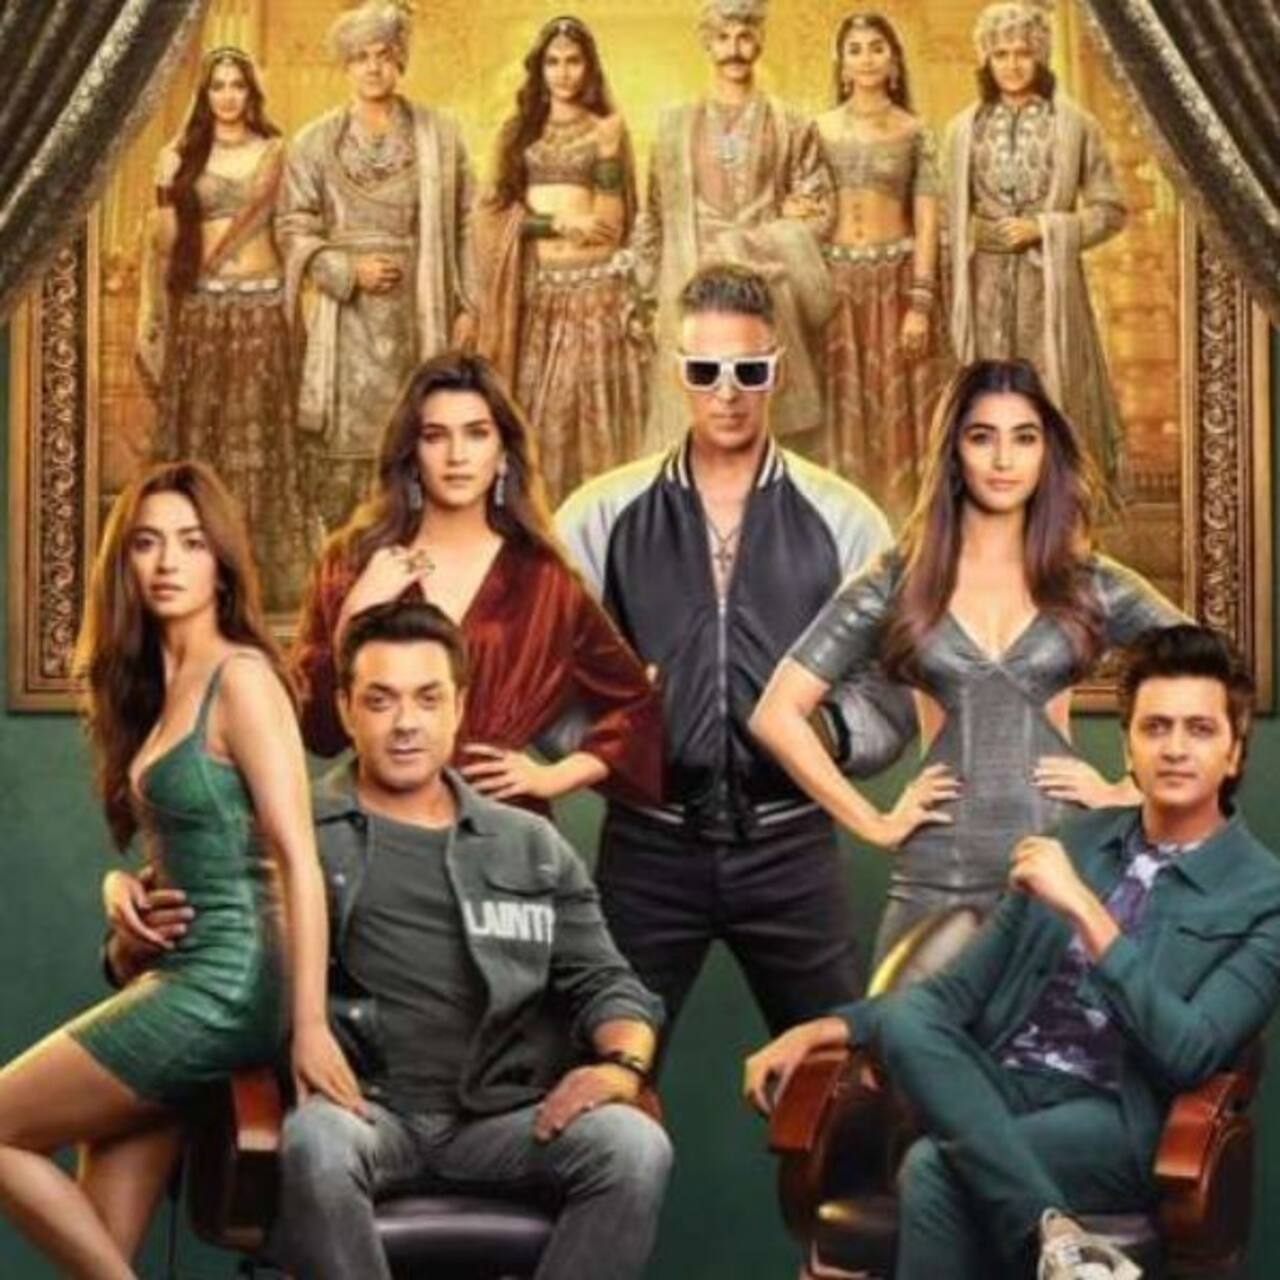 Housefull 4 box office collection day 5 early estimates : Akshay Kumar starrer enters the 100 crore club